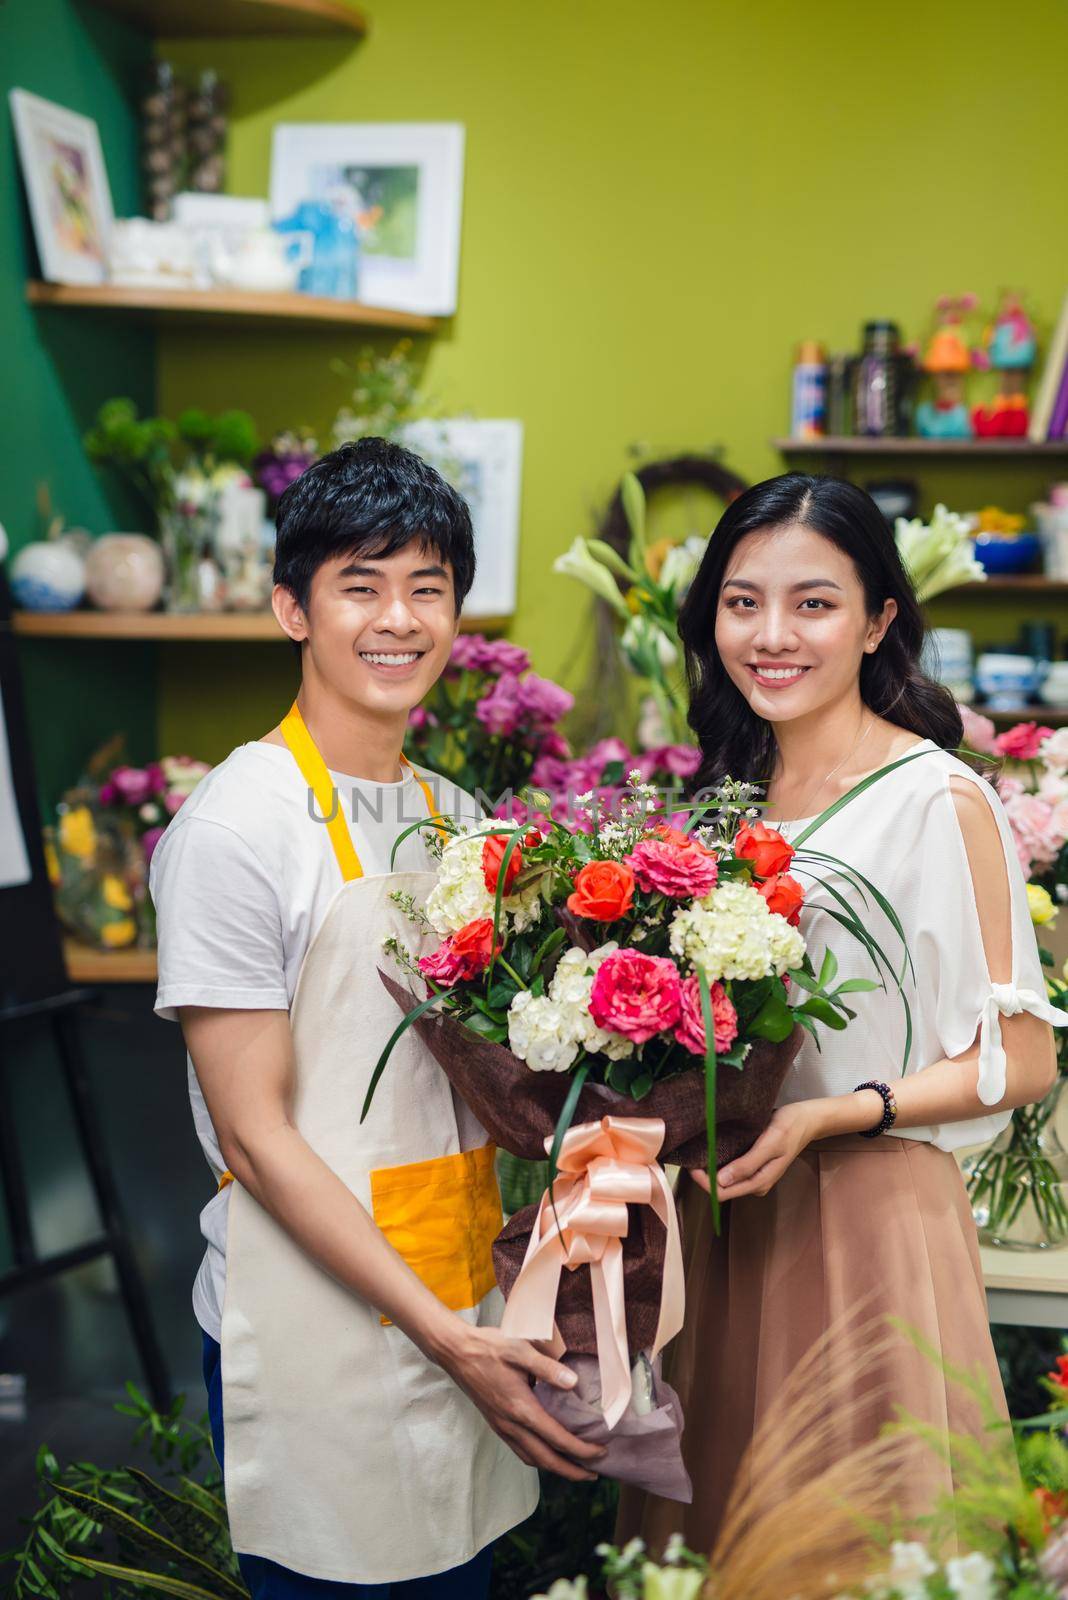 Male florist offering flowers at the counter in the florist shop by makidotvn